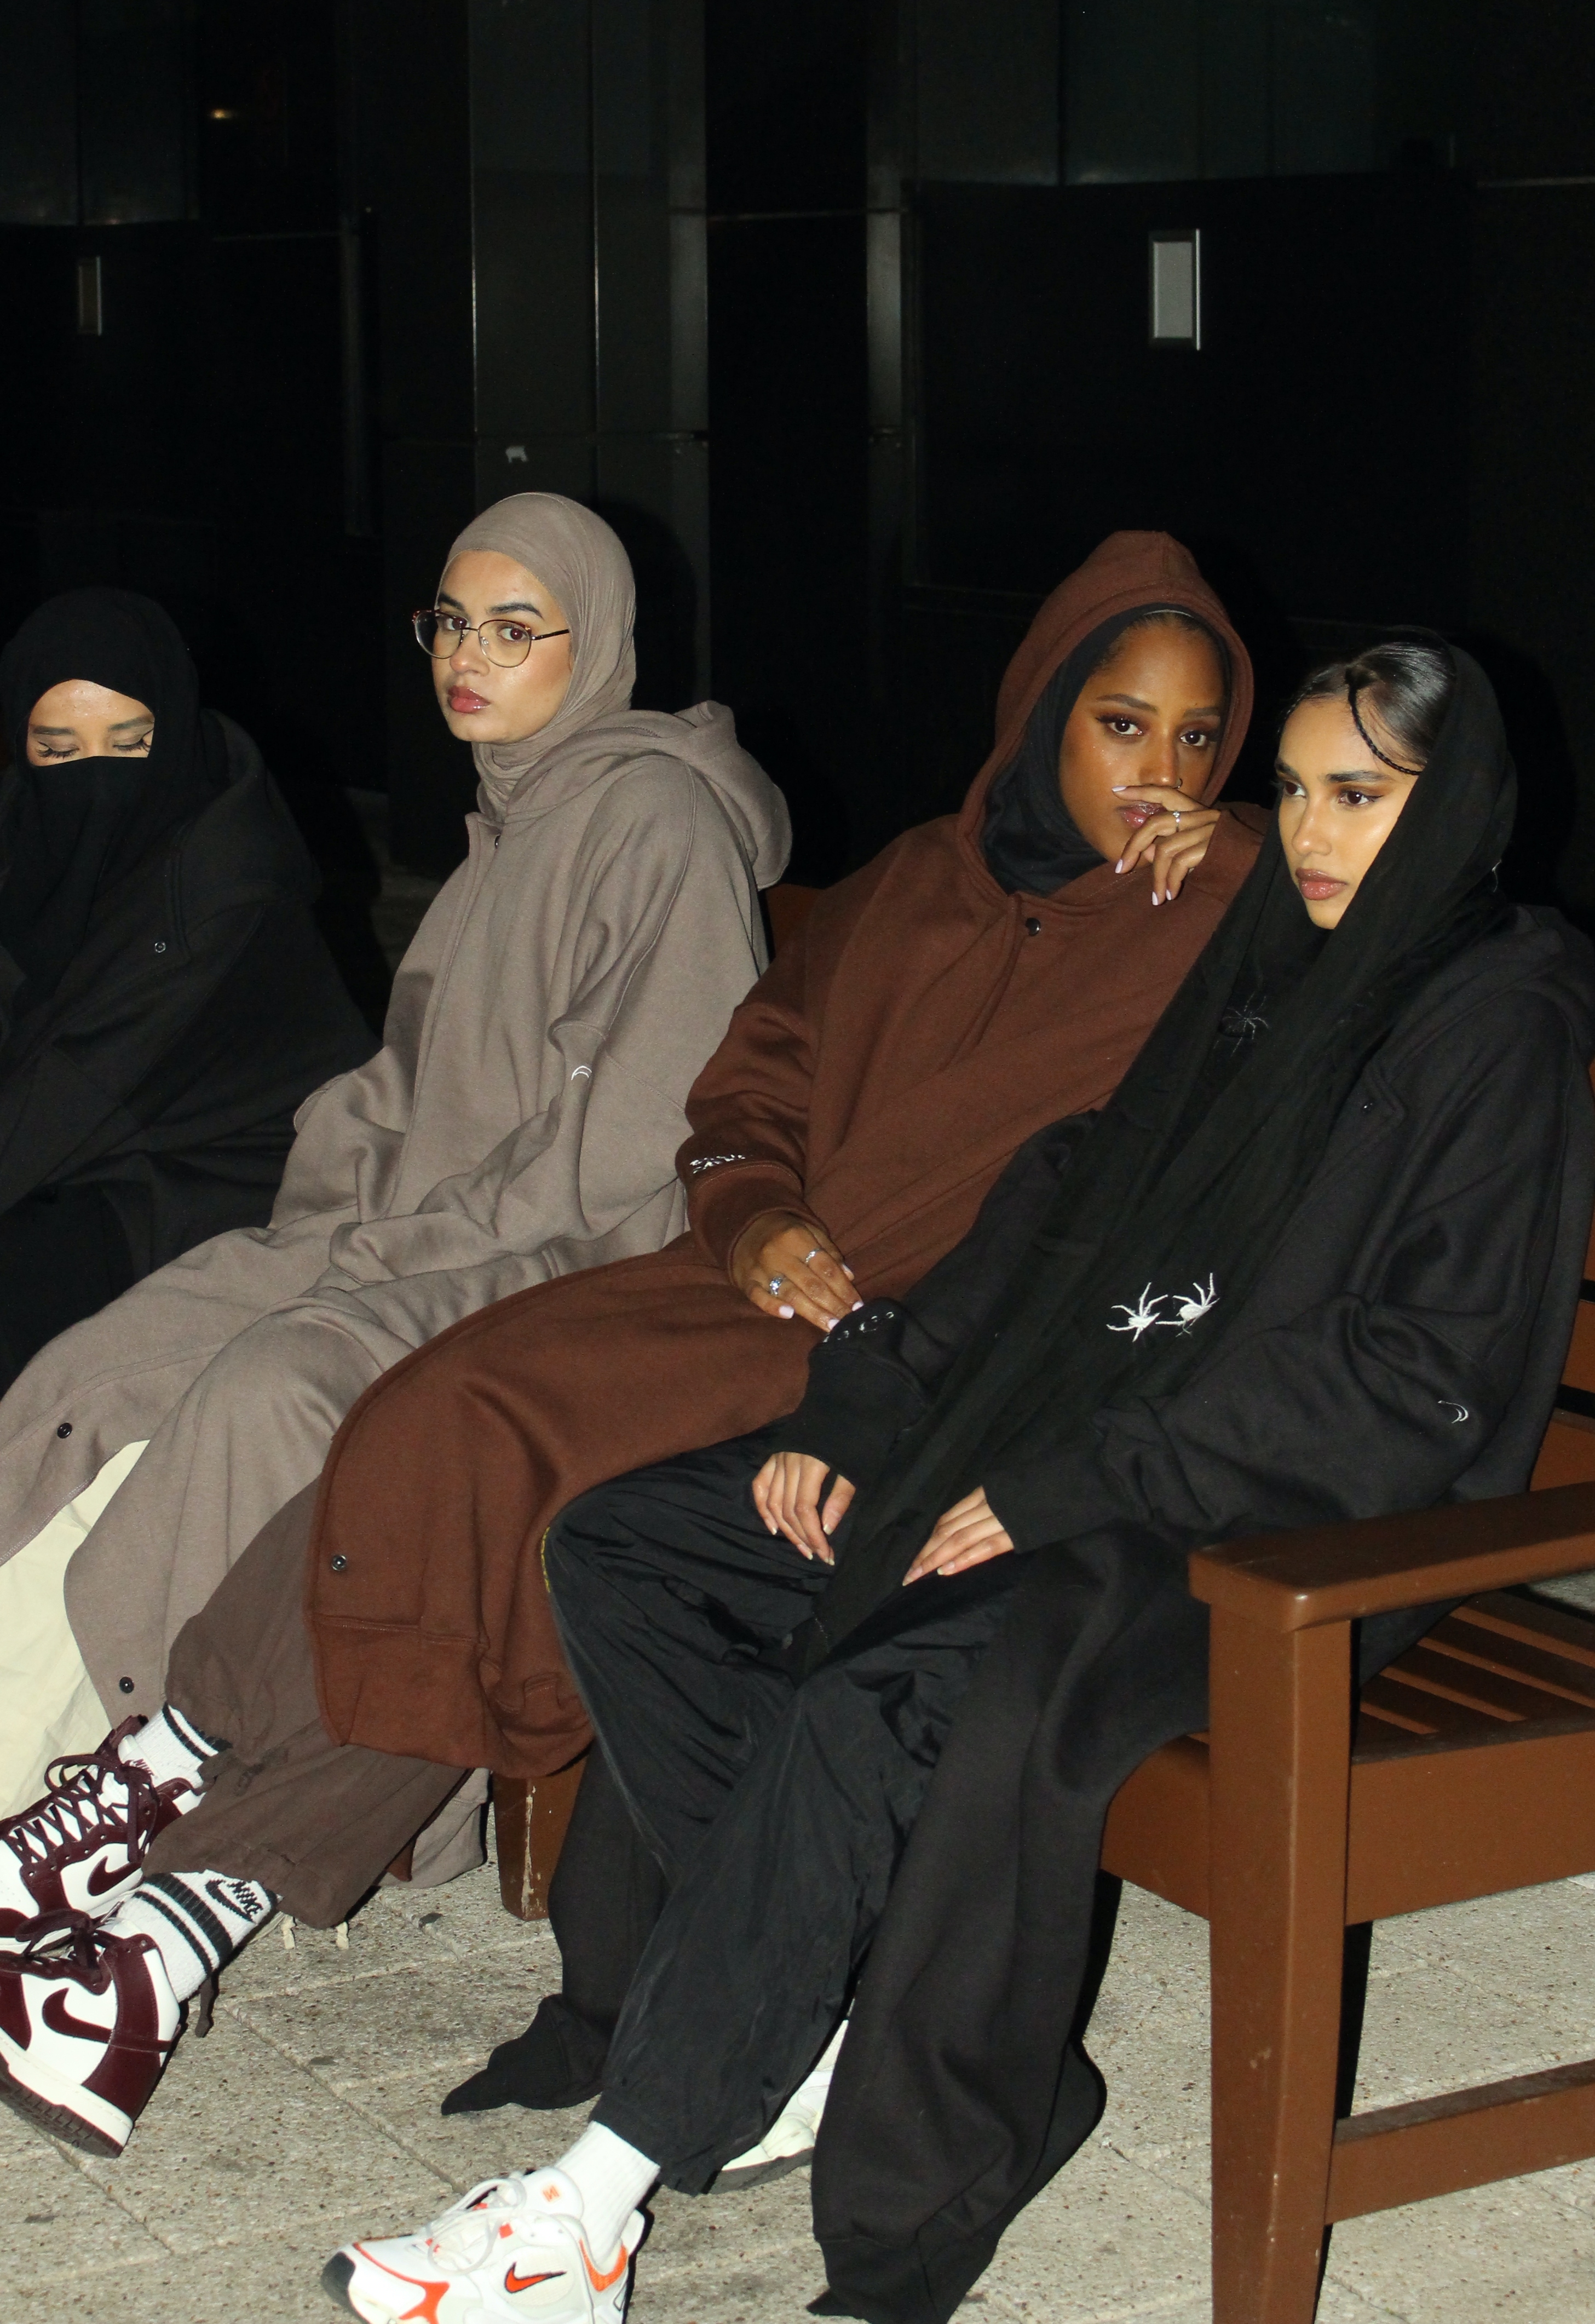 Four women wearing hijabs and hoodie abayas seated together on a bench